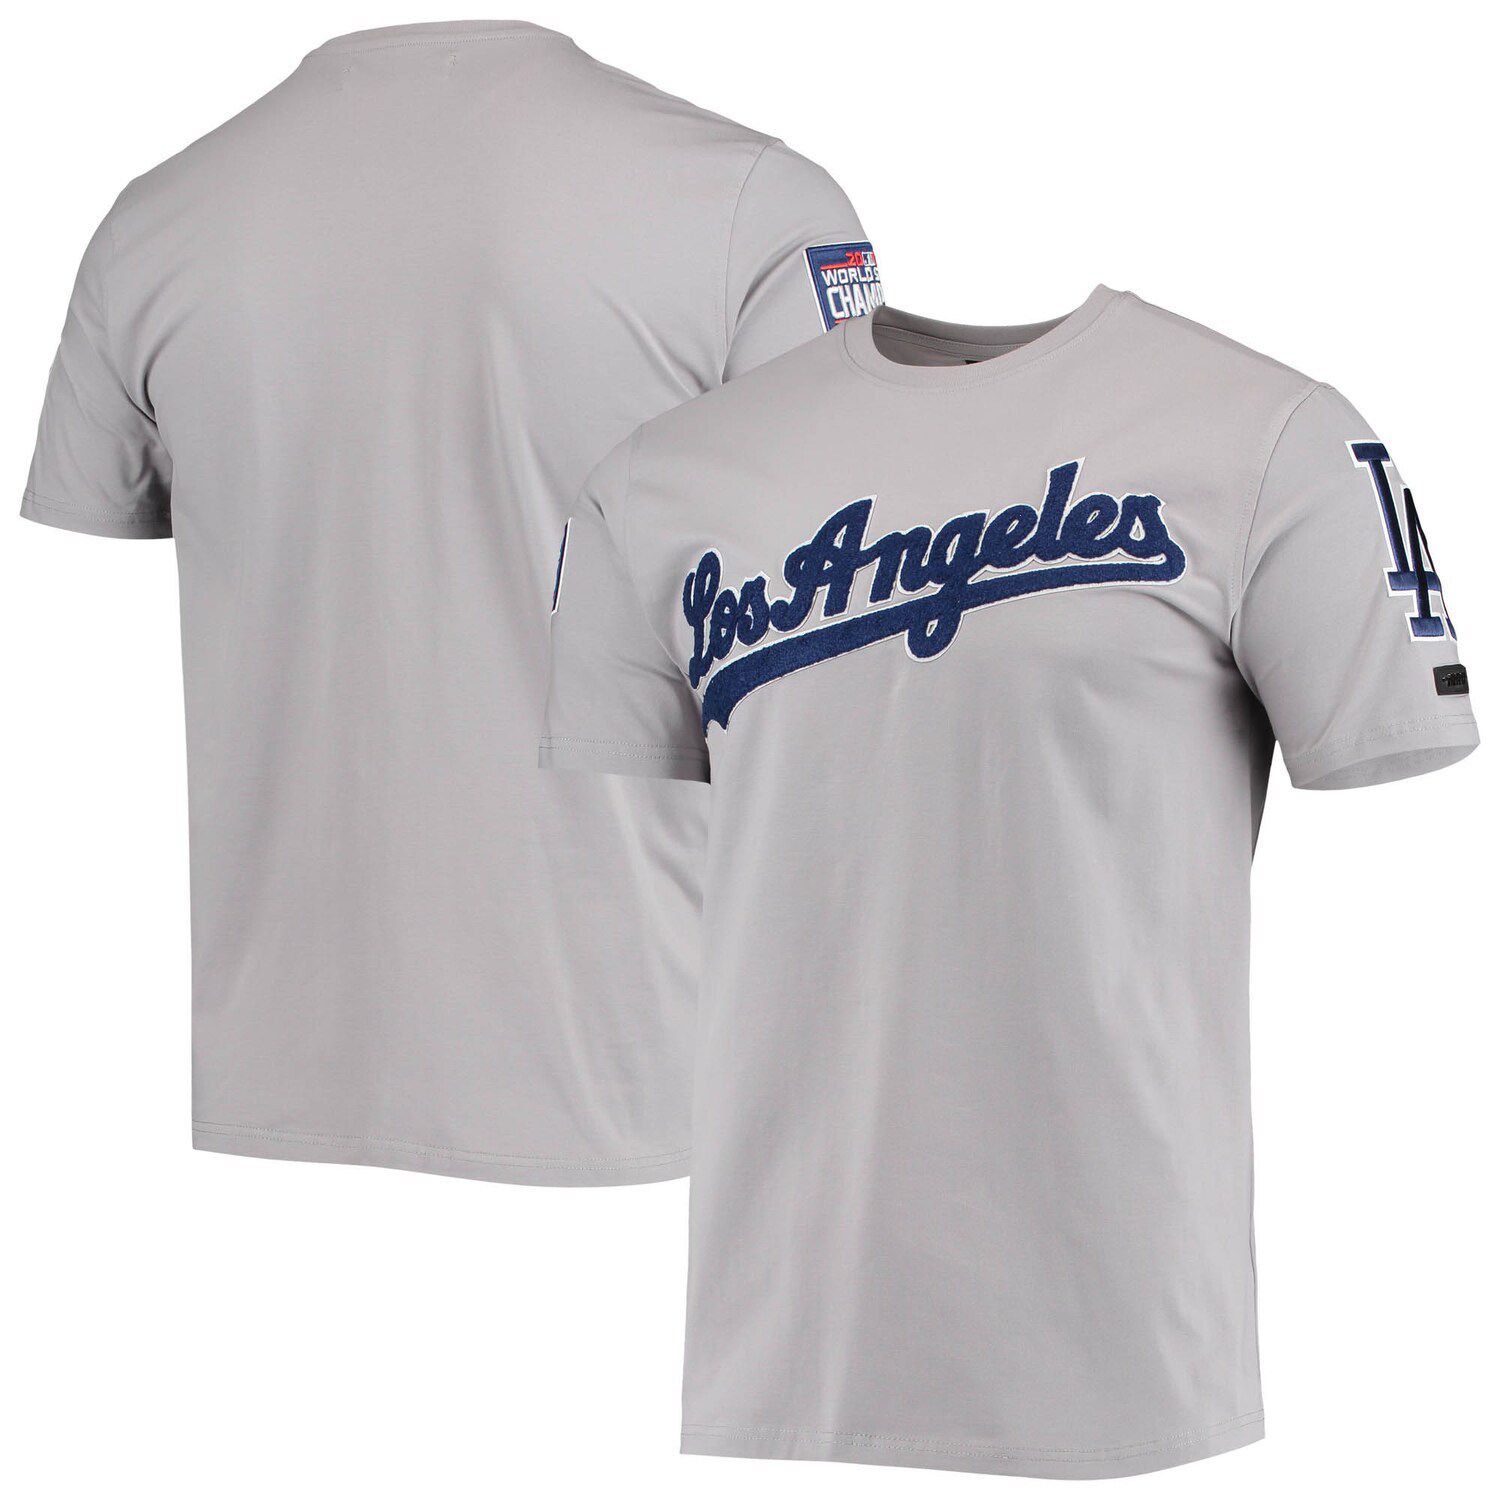 Los Angeles Dodgers Vamos Los Doyers T-shirt Made to Order 